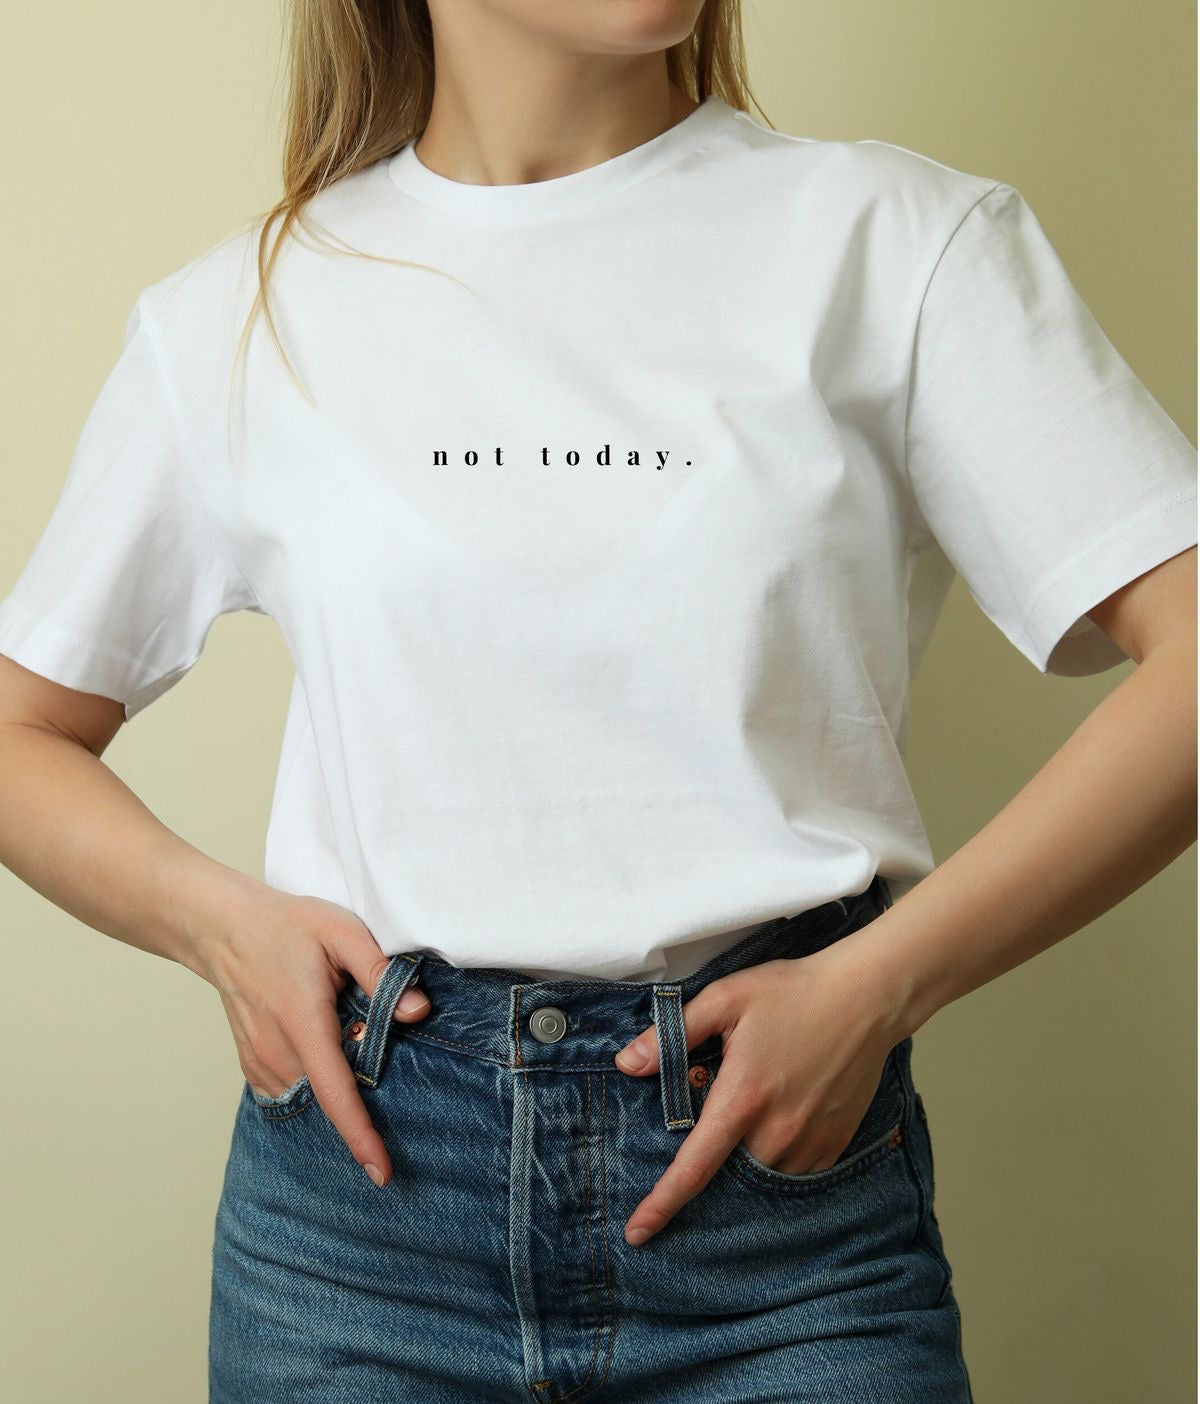 Not Today White Printed Unisex T-Shirt